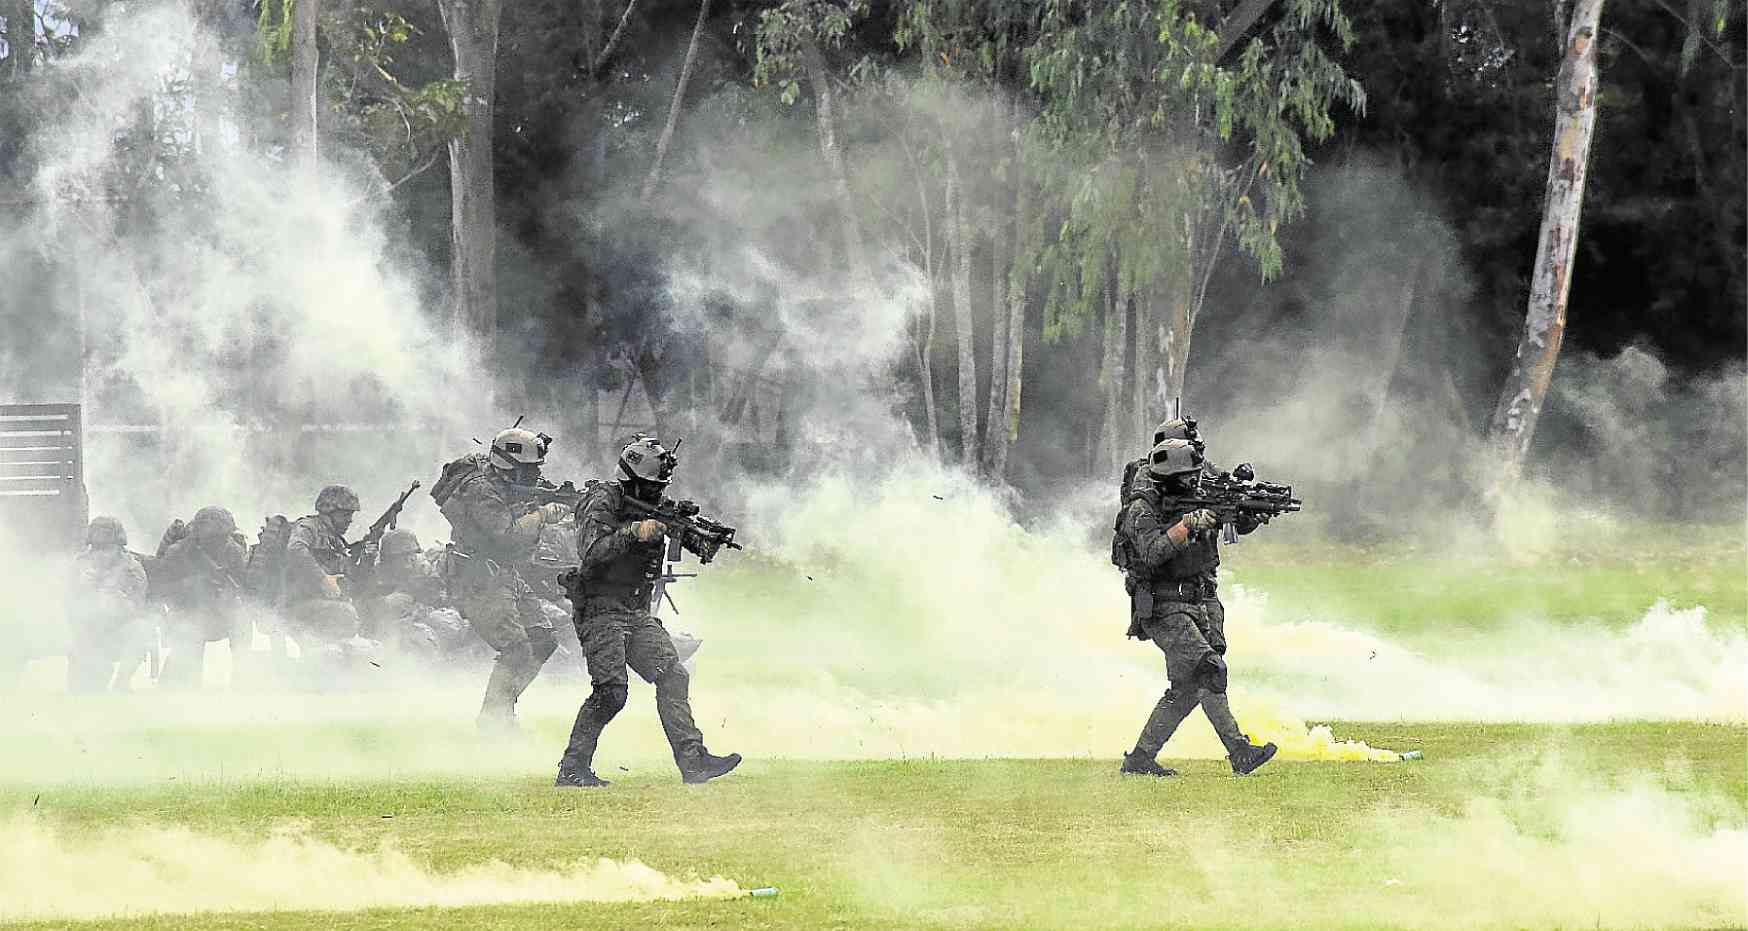 Marawi siege inspires new course at PMA